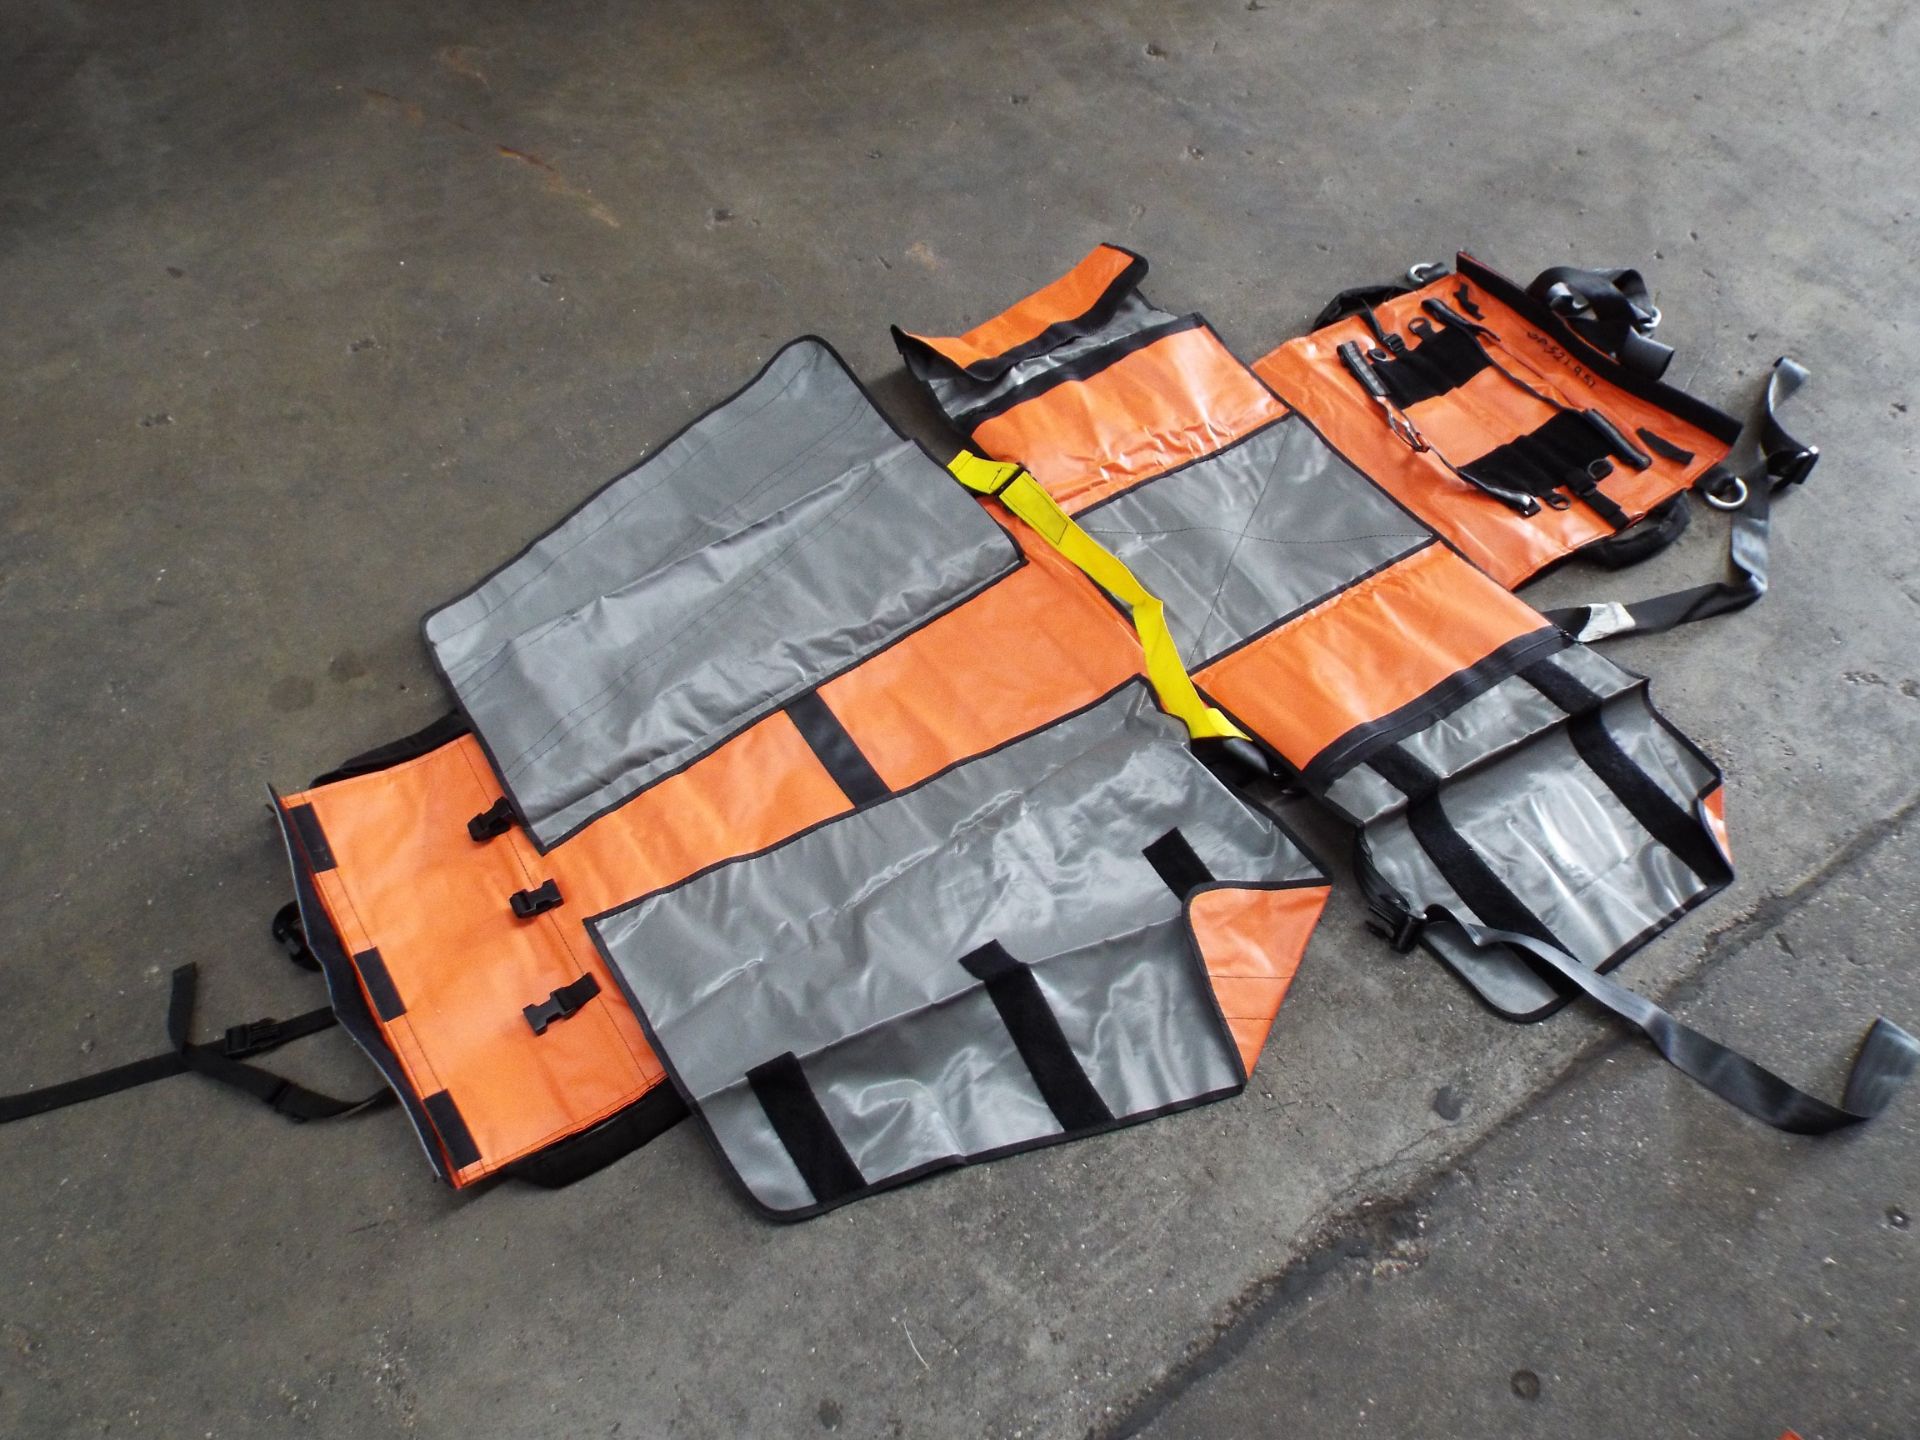 Reeves EMS Immobilization Stretcher